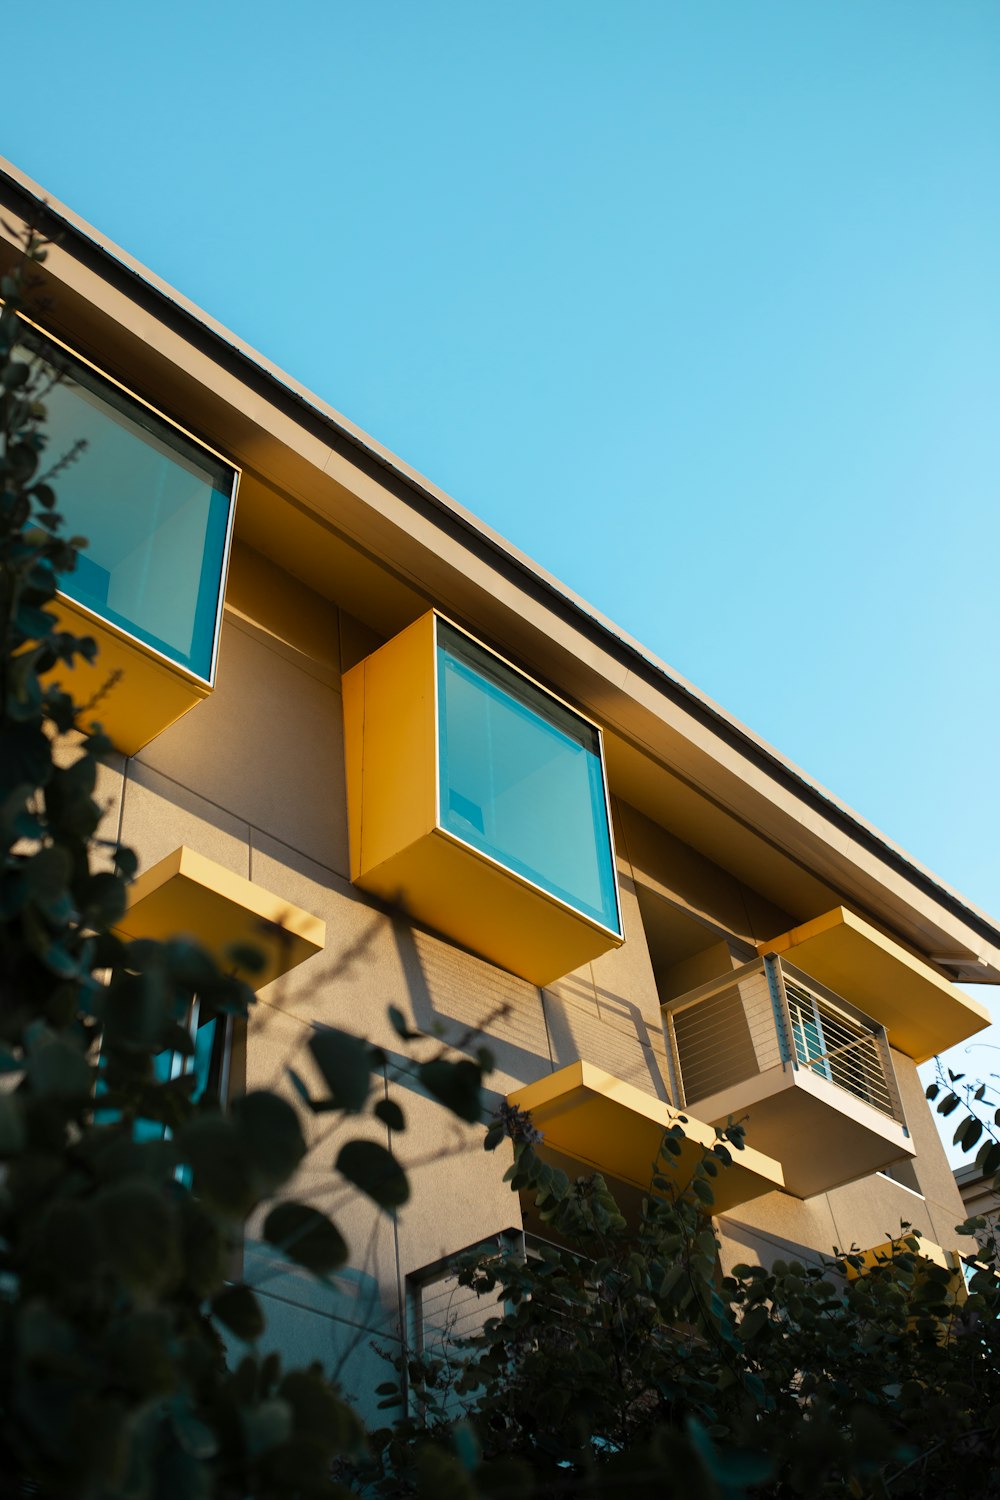 a yellow house with windows